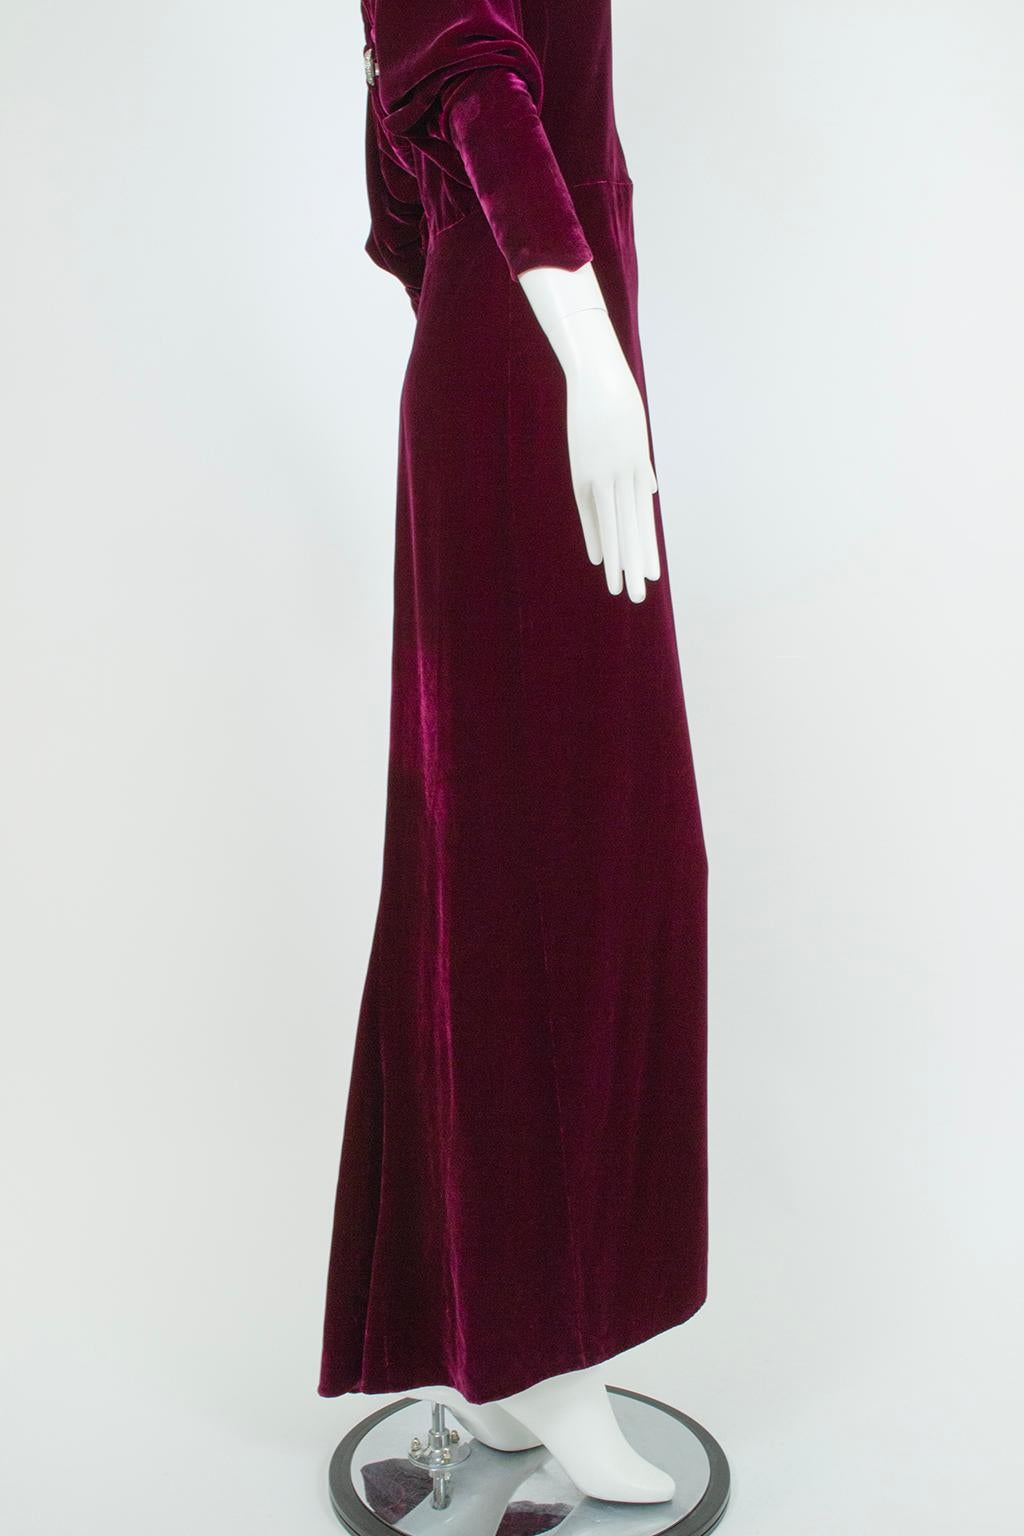 Regency Burgundy Silk Velvet Jeweled Cutout Back Bias Gown with Train – M, 1930s For Sale 9